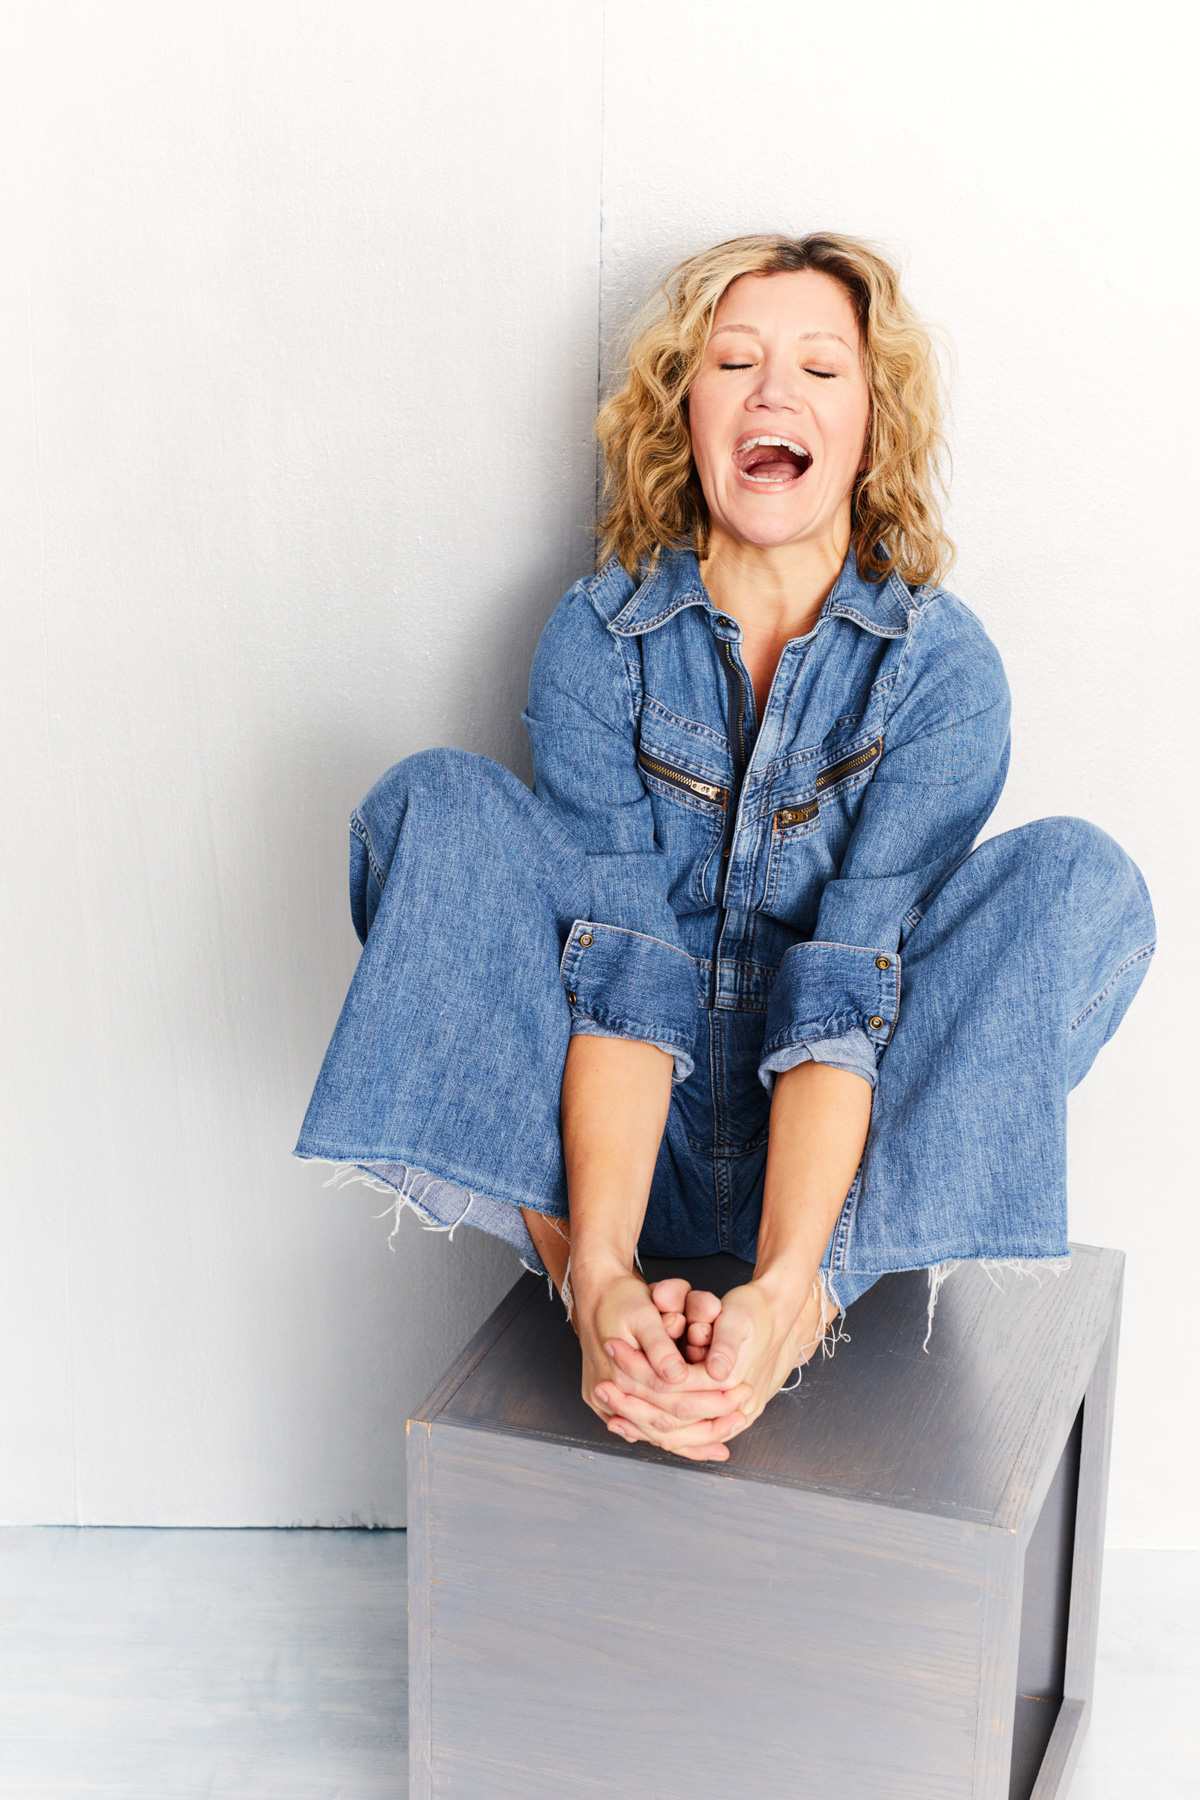 Actress portrait October Moore wearing denim overalls known for playing gold-digging Shannon in Baskets and acting mom Vicky Traux in Netflix